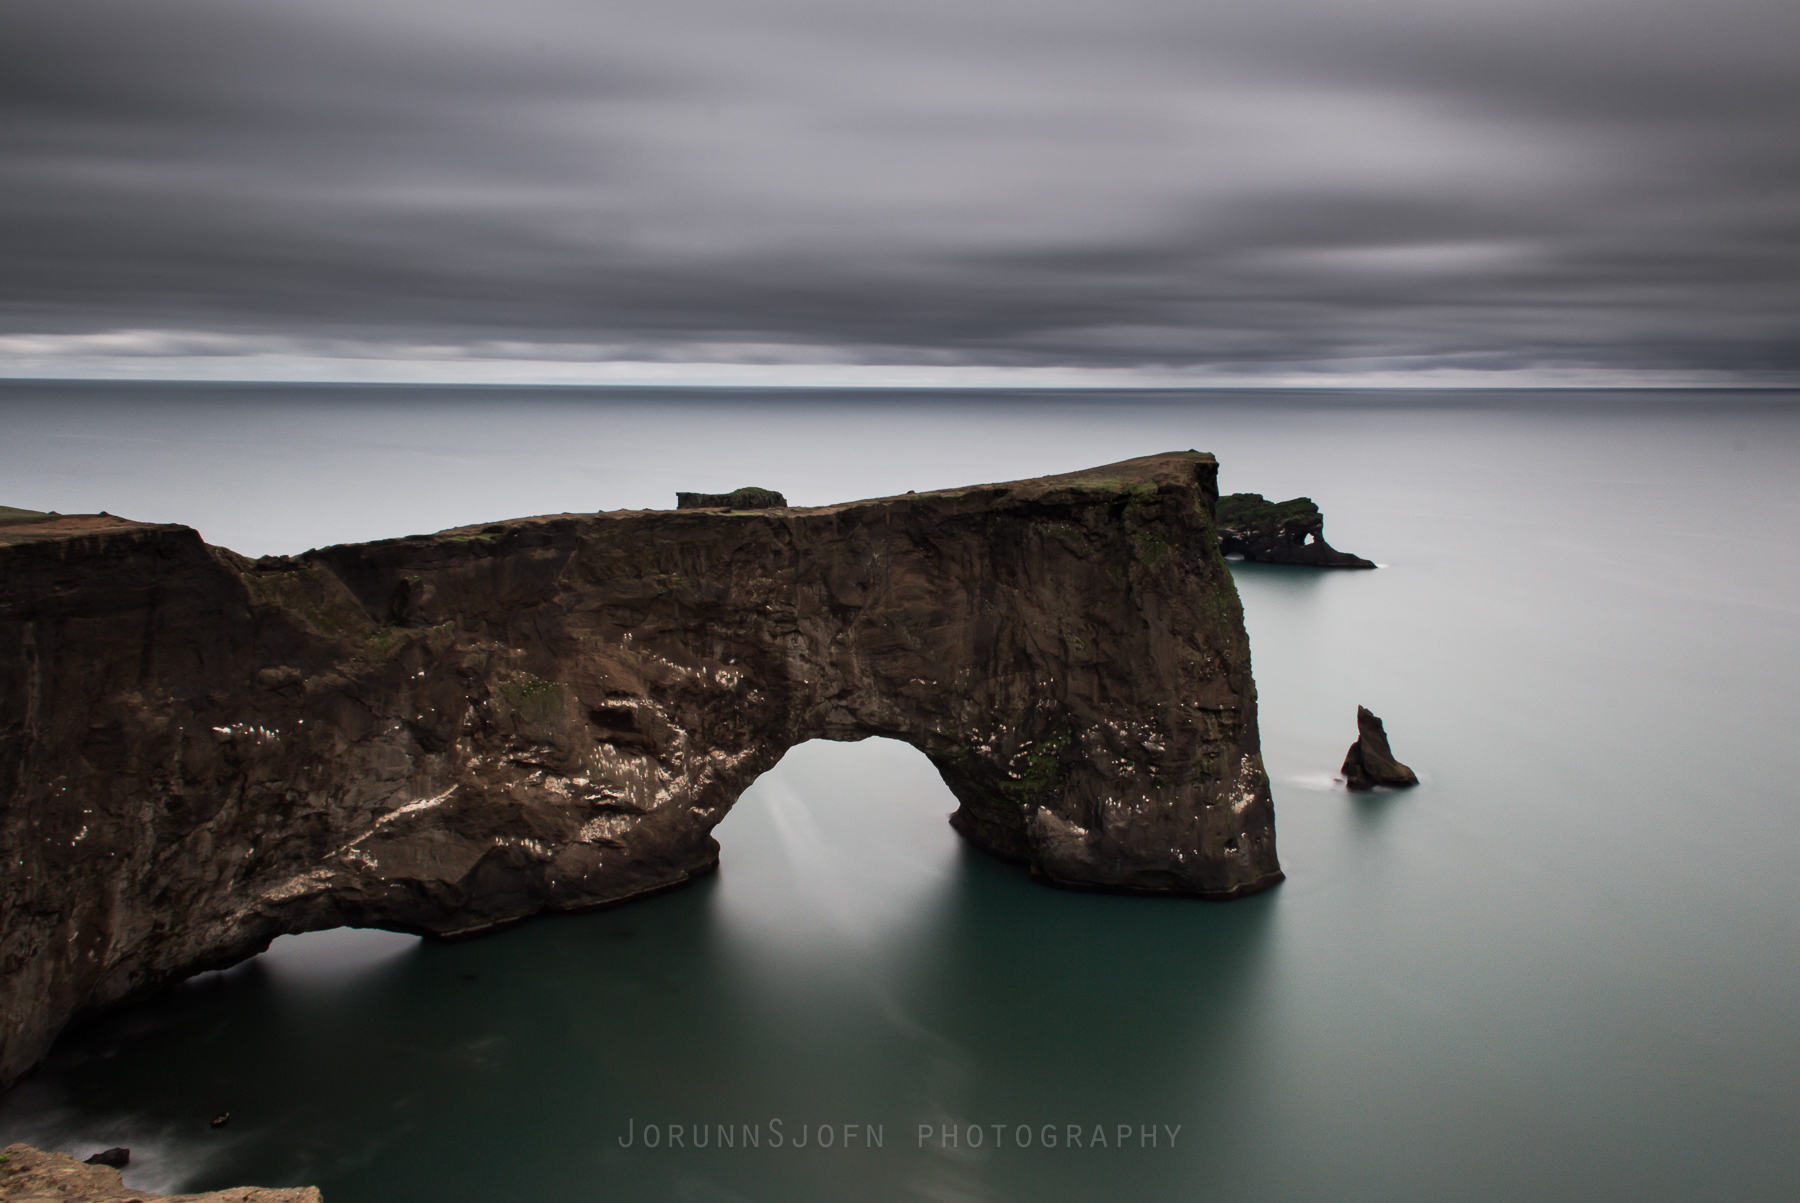 Dyrhólaey - The Arch with the Hole | Guide to Iceland